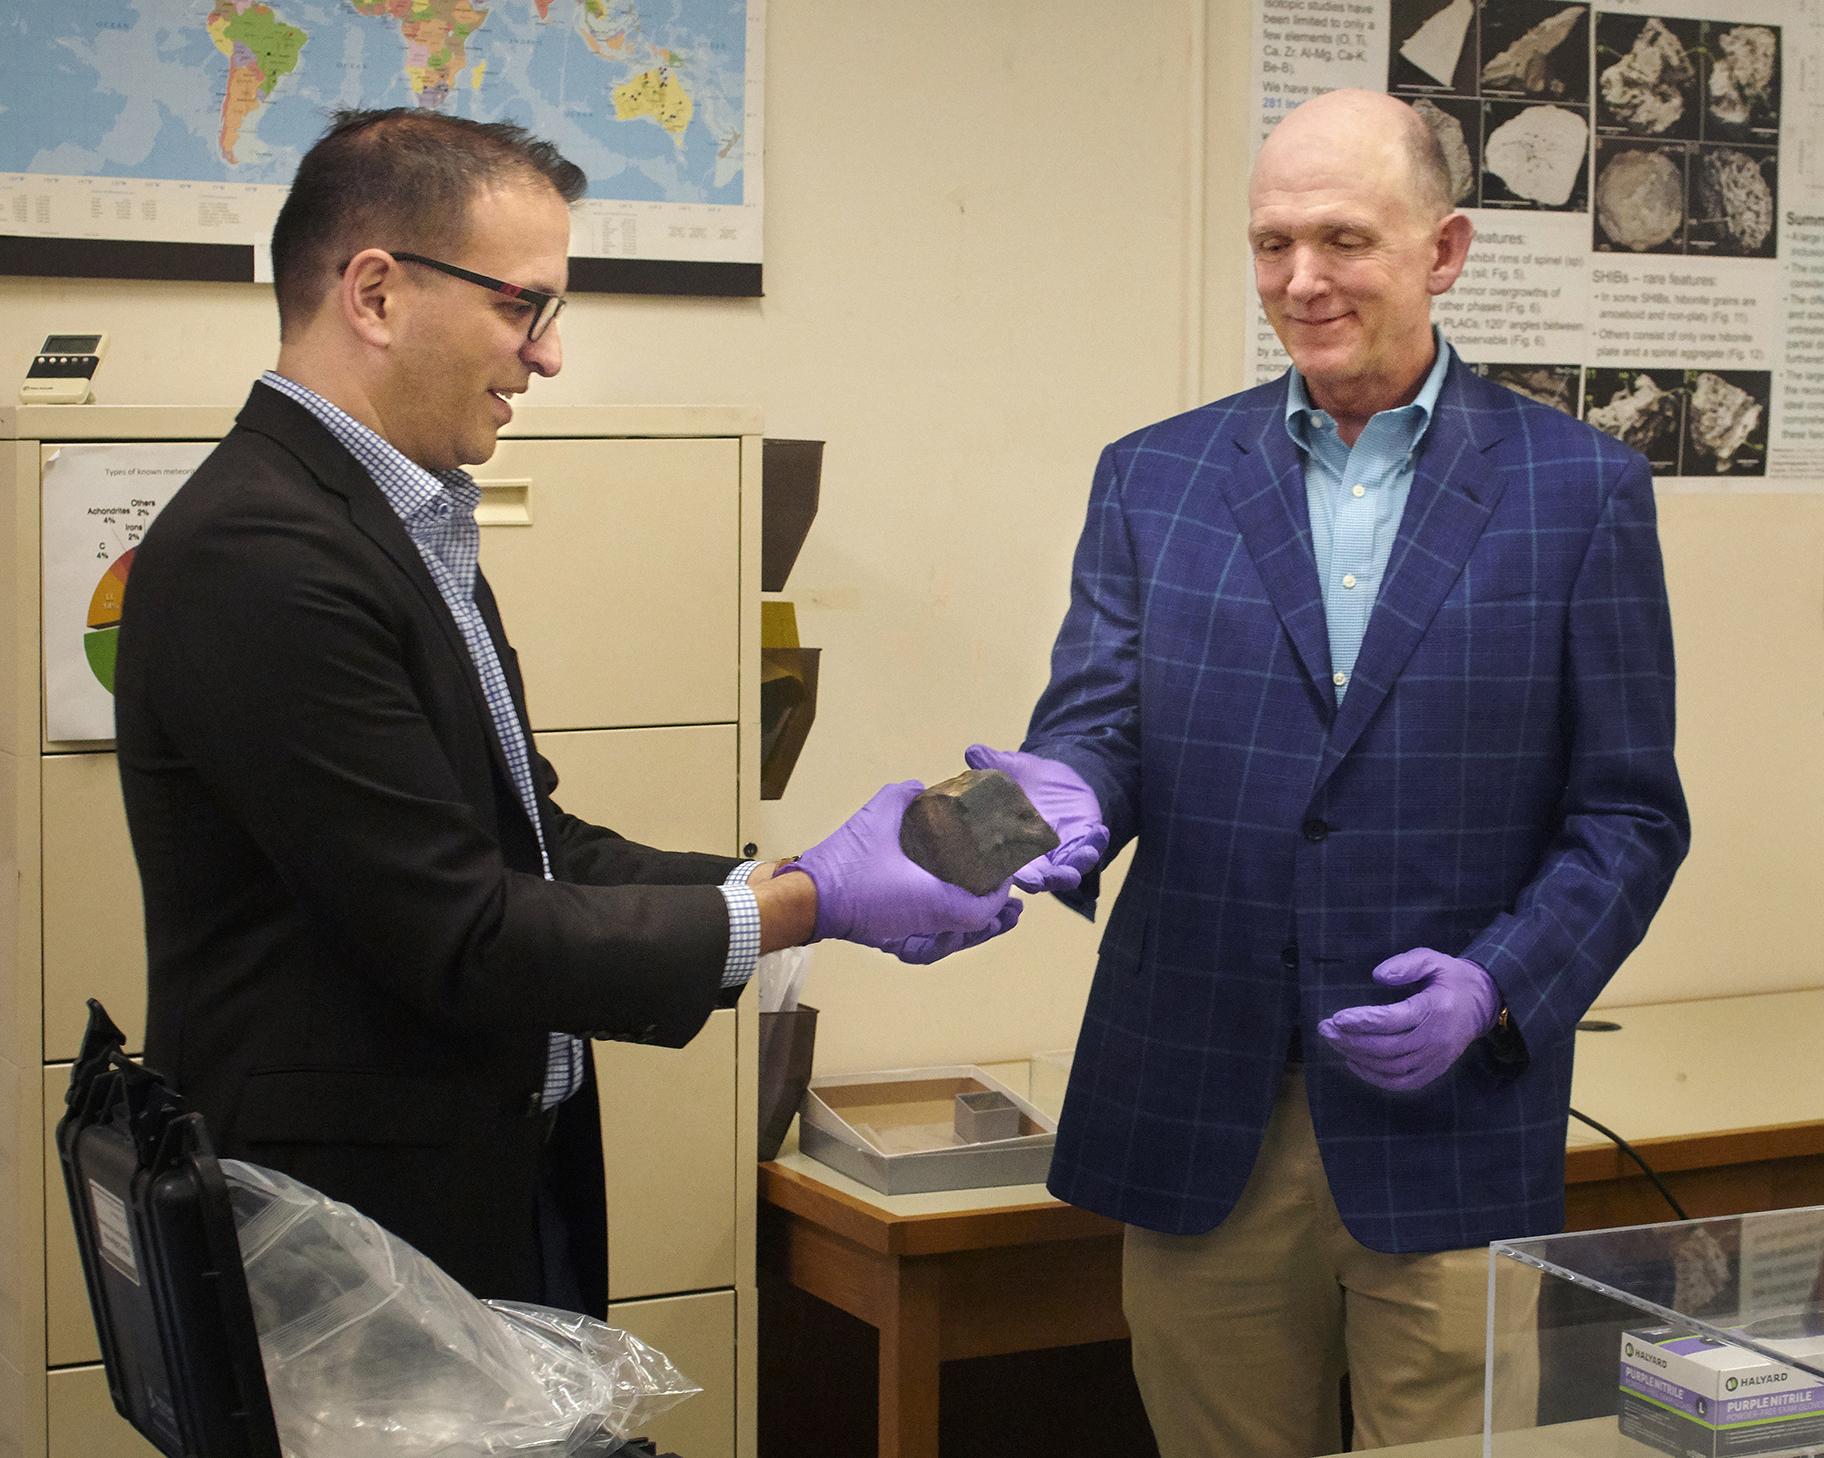 Field Museum donor Terry Boudreaux, right, holds the meteorite along with Philipp Heck, the museum’s associate curator for meteoritics and polar studies. (John Weinstein / Field Museum) 